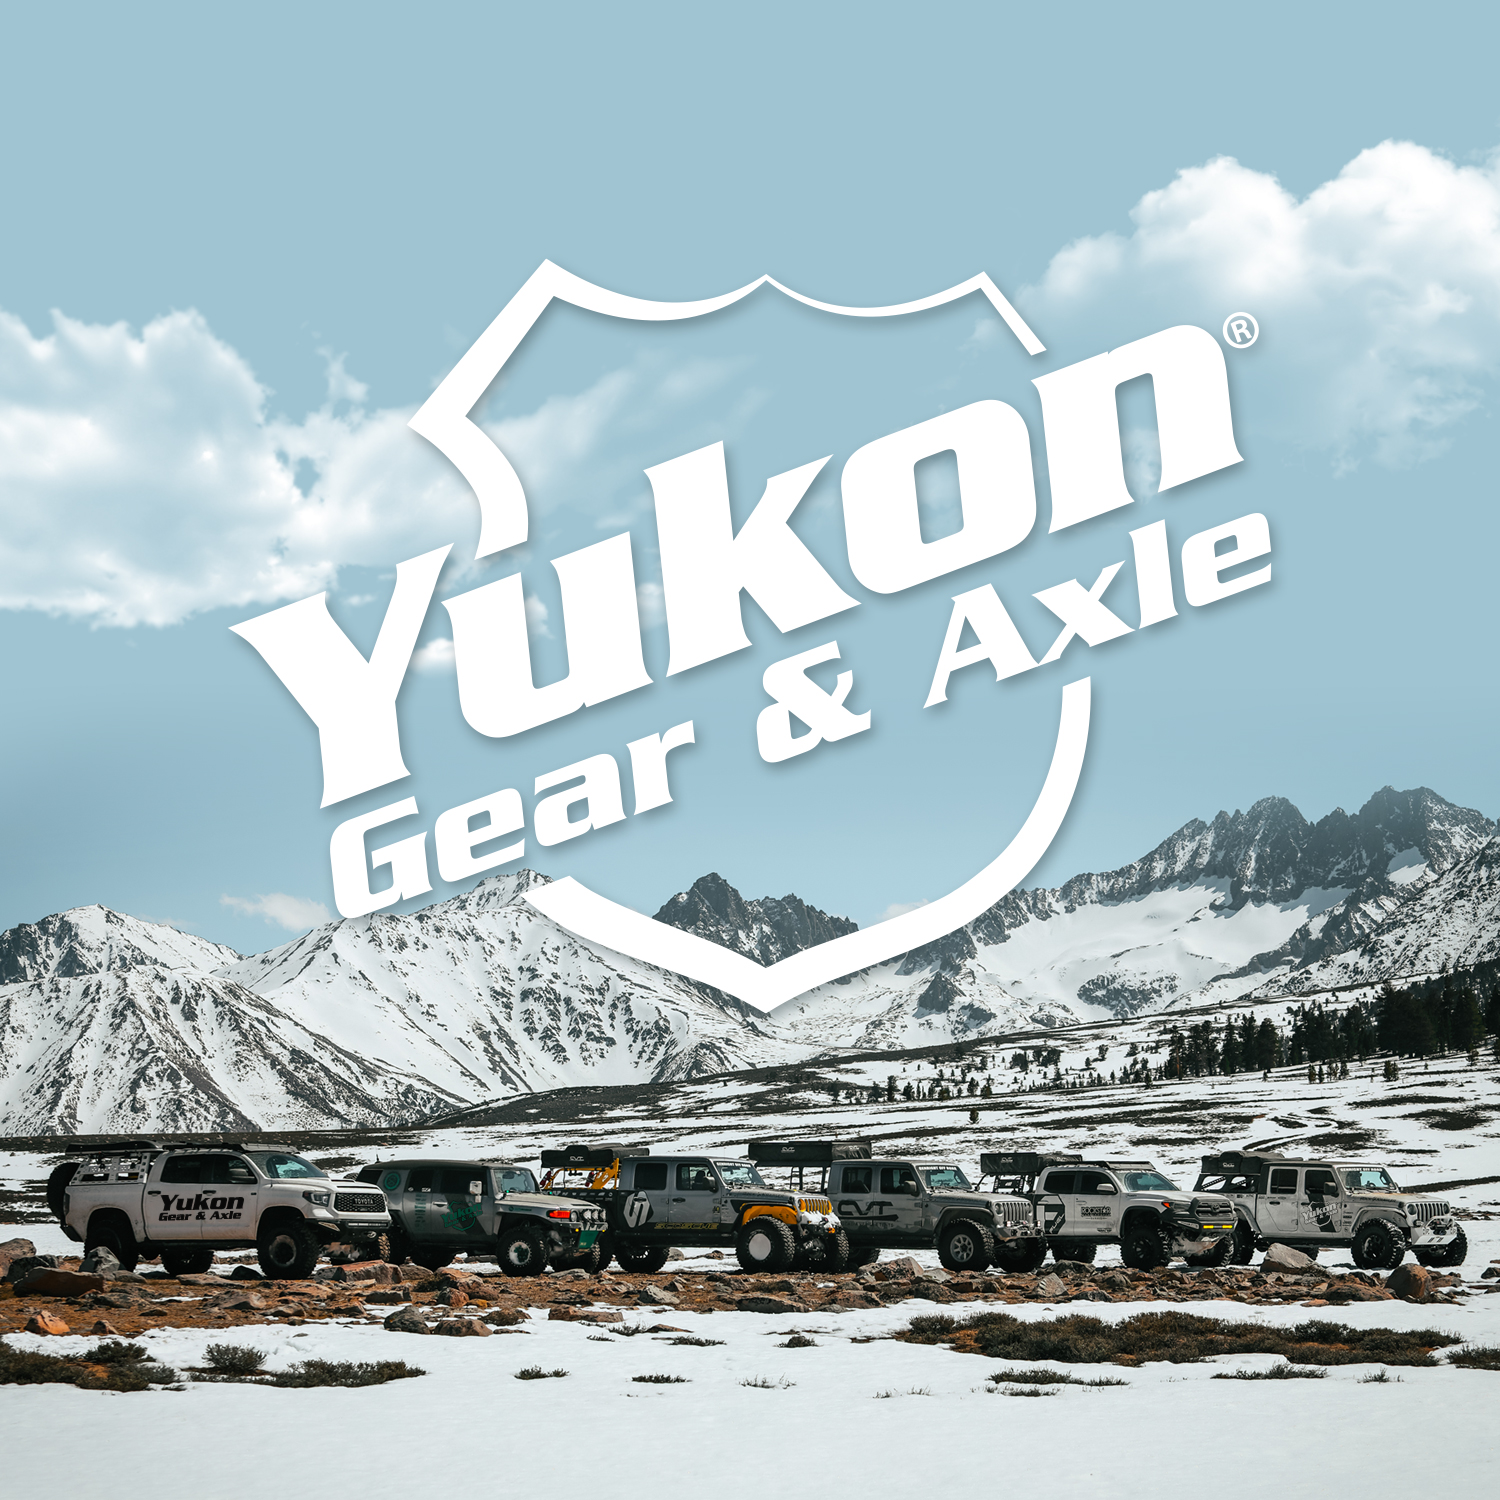 High performance Yukon ring & pinion gear set for GM 12T in a 3.07 ratio. 